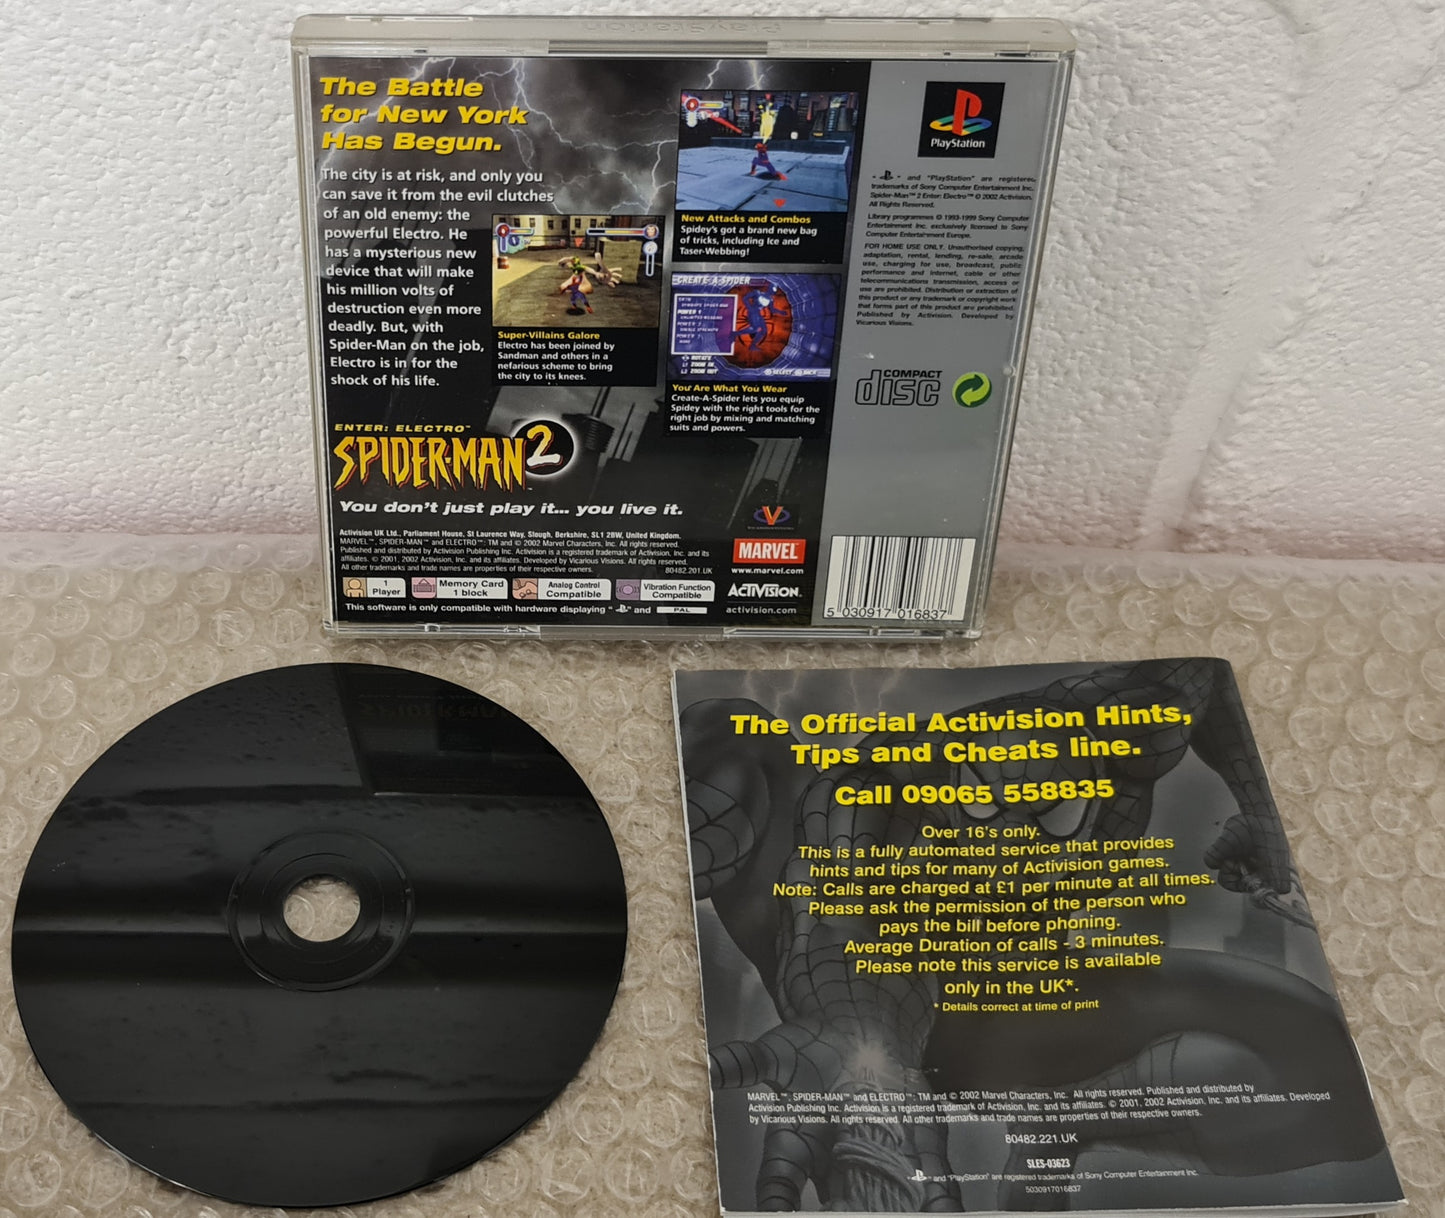 Spider-Man 2 Enter Electro Platinum Sony Playstation 1 (PS1) Game